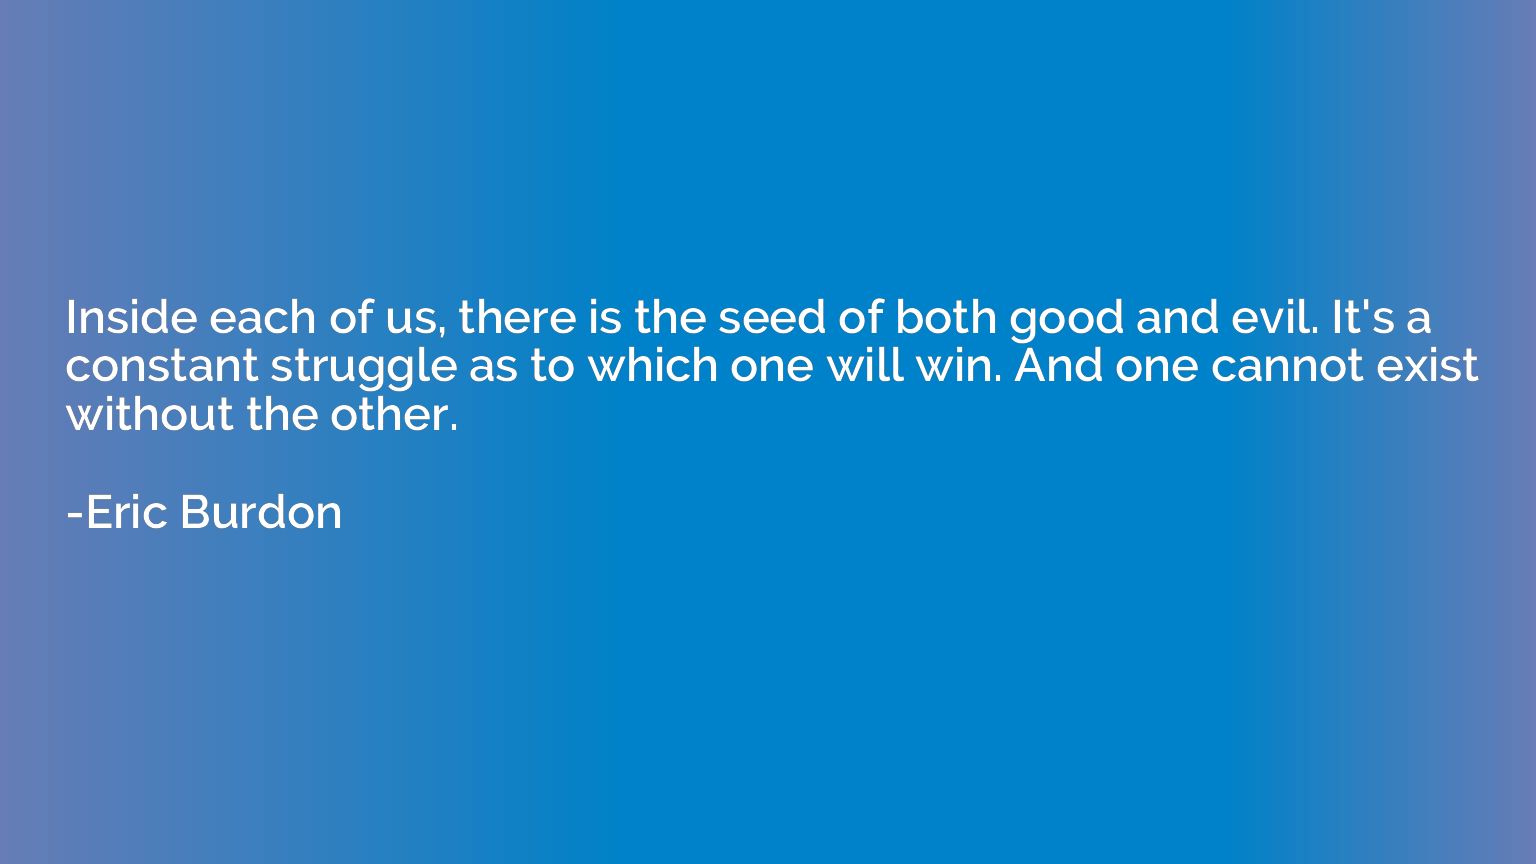 Inside each of us, there is the seed of both good and evil. 